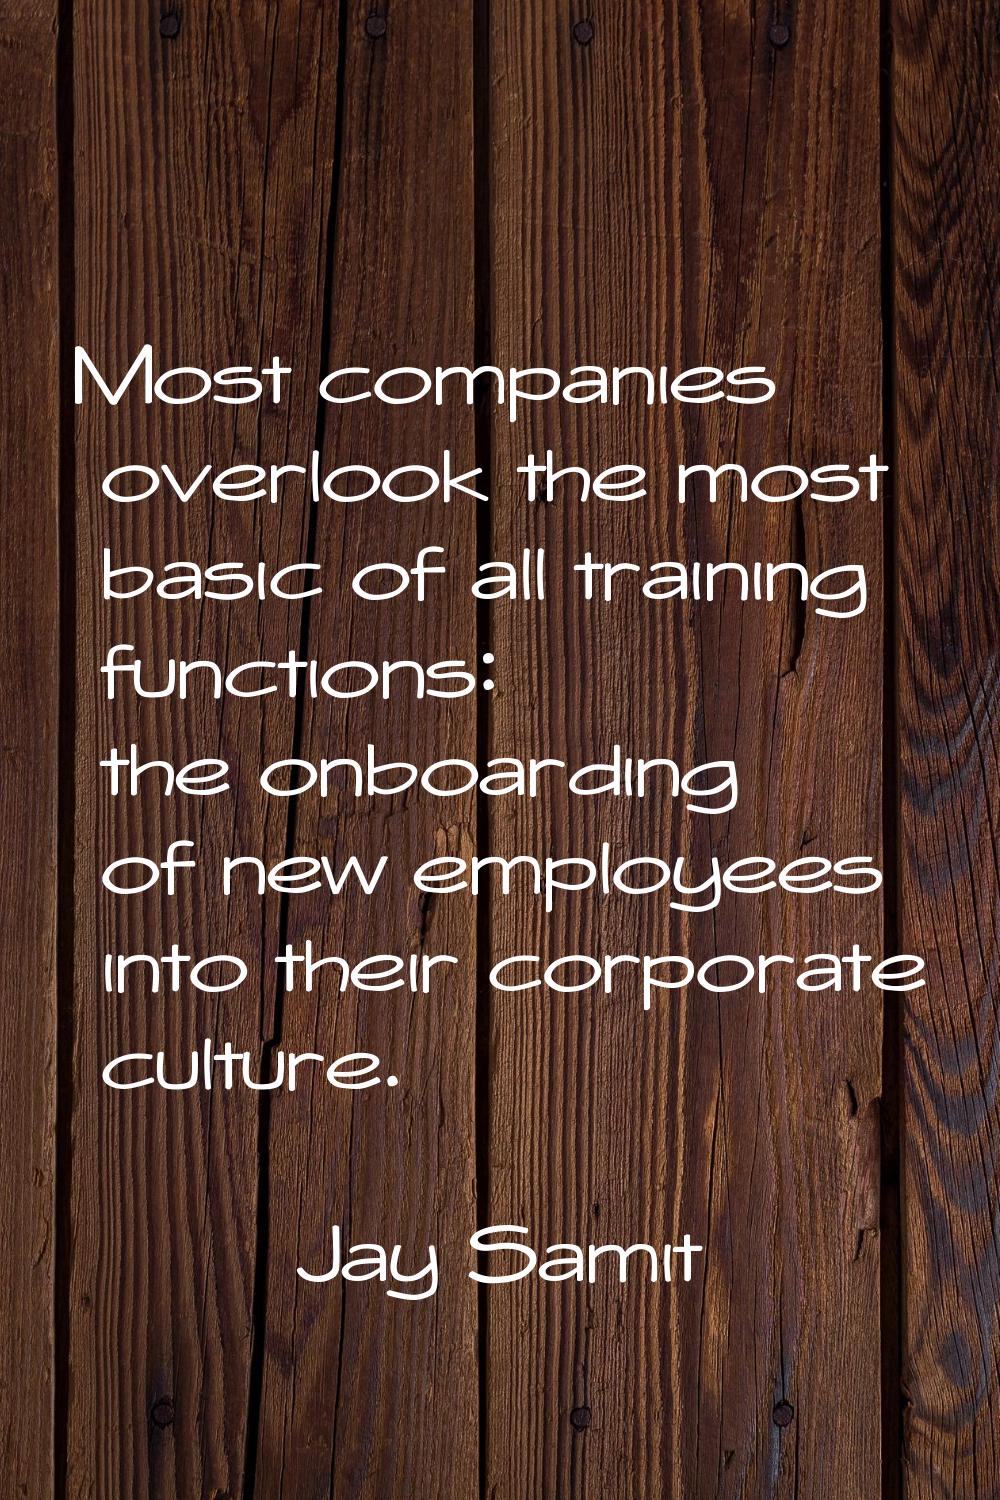 Most companies overlook the most basic of all training functions: the onboarding of new employees i